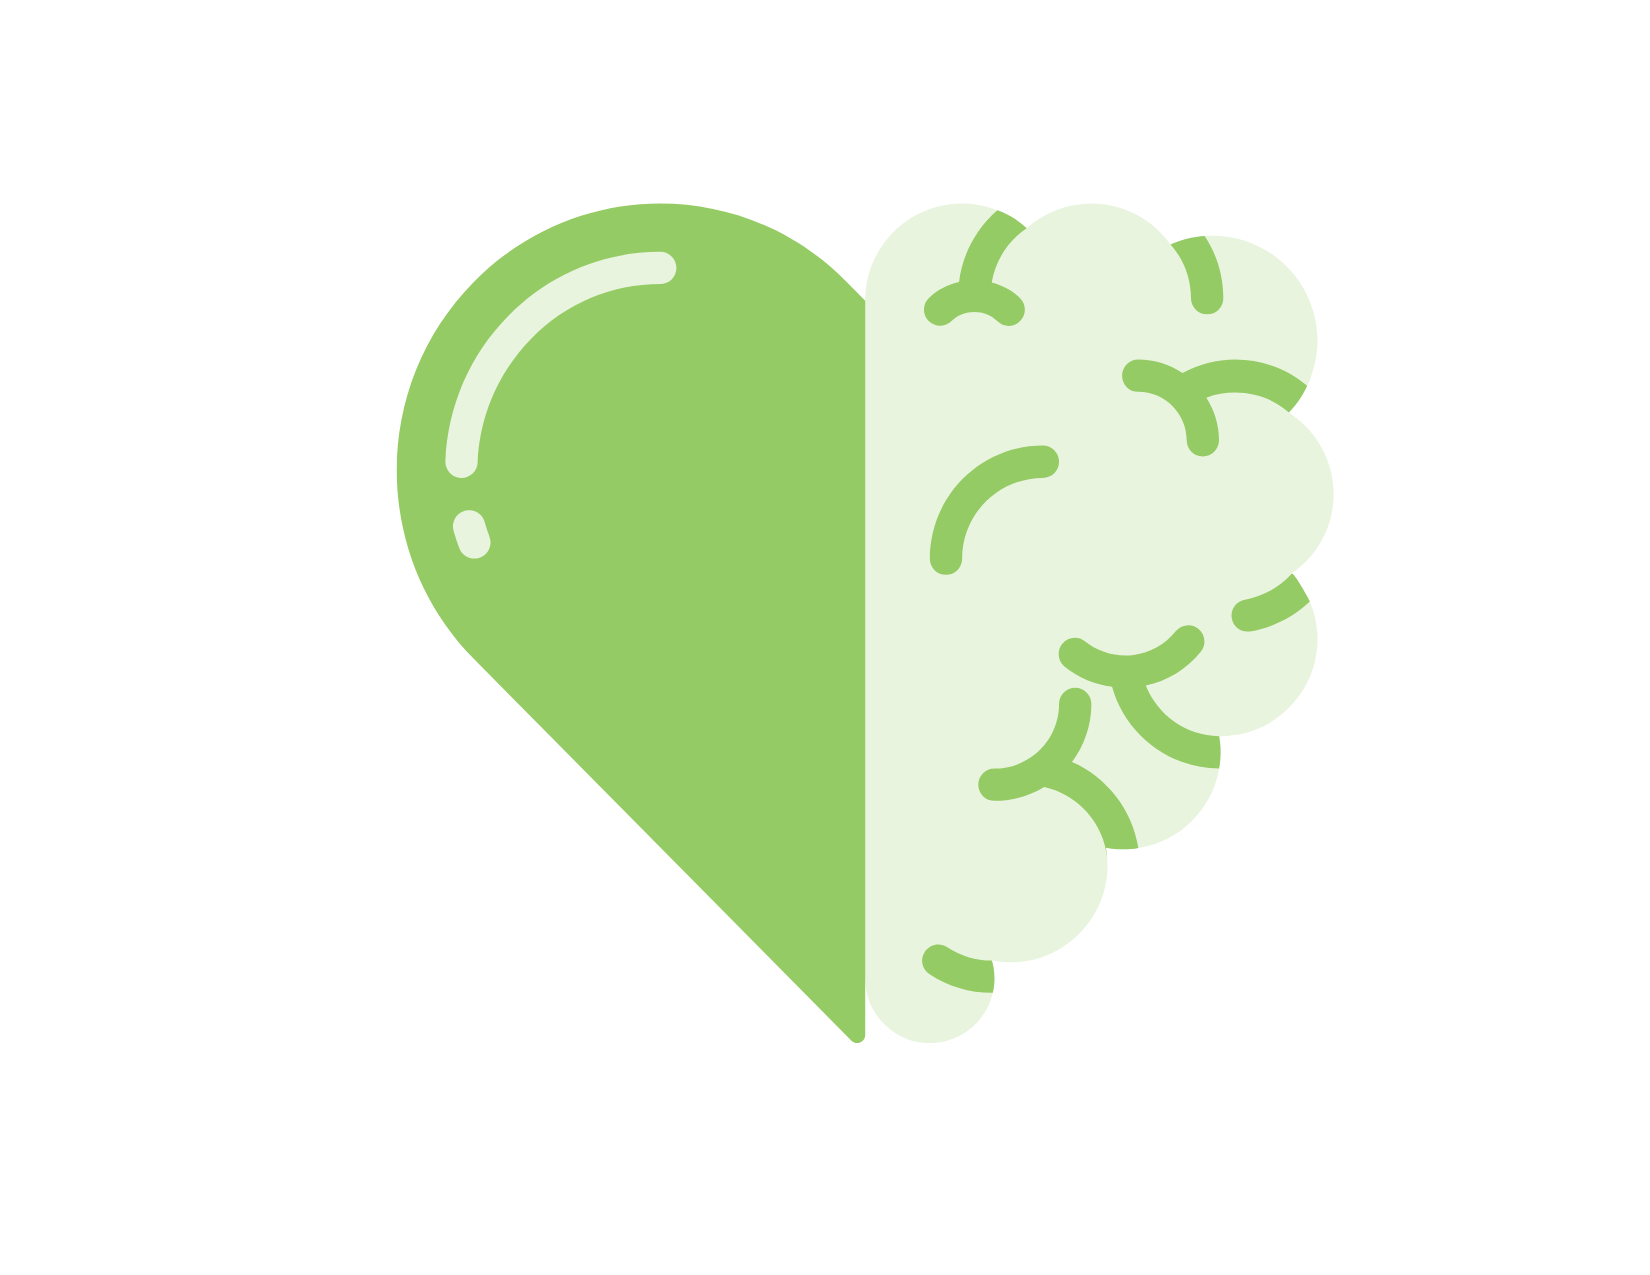 illustrated image of a heart with one half resembling a heart and the other half resembling a brain to depict mental wellness